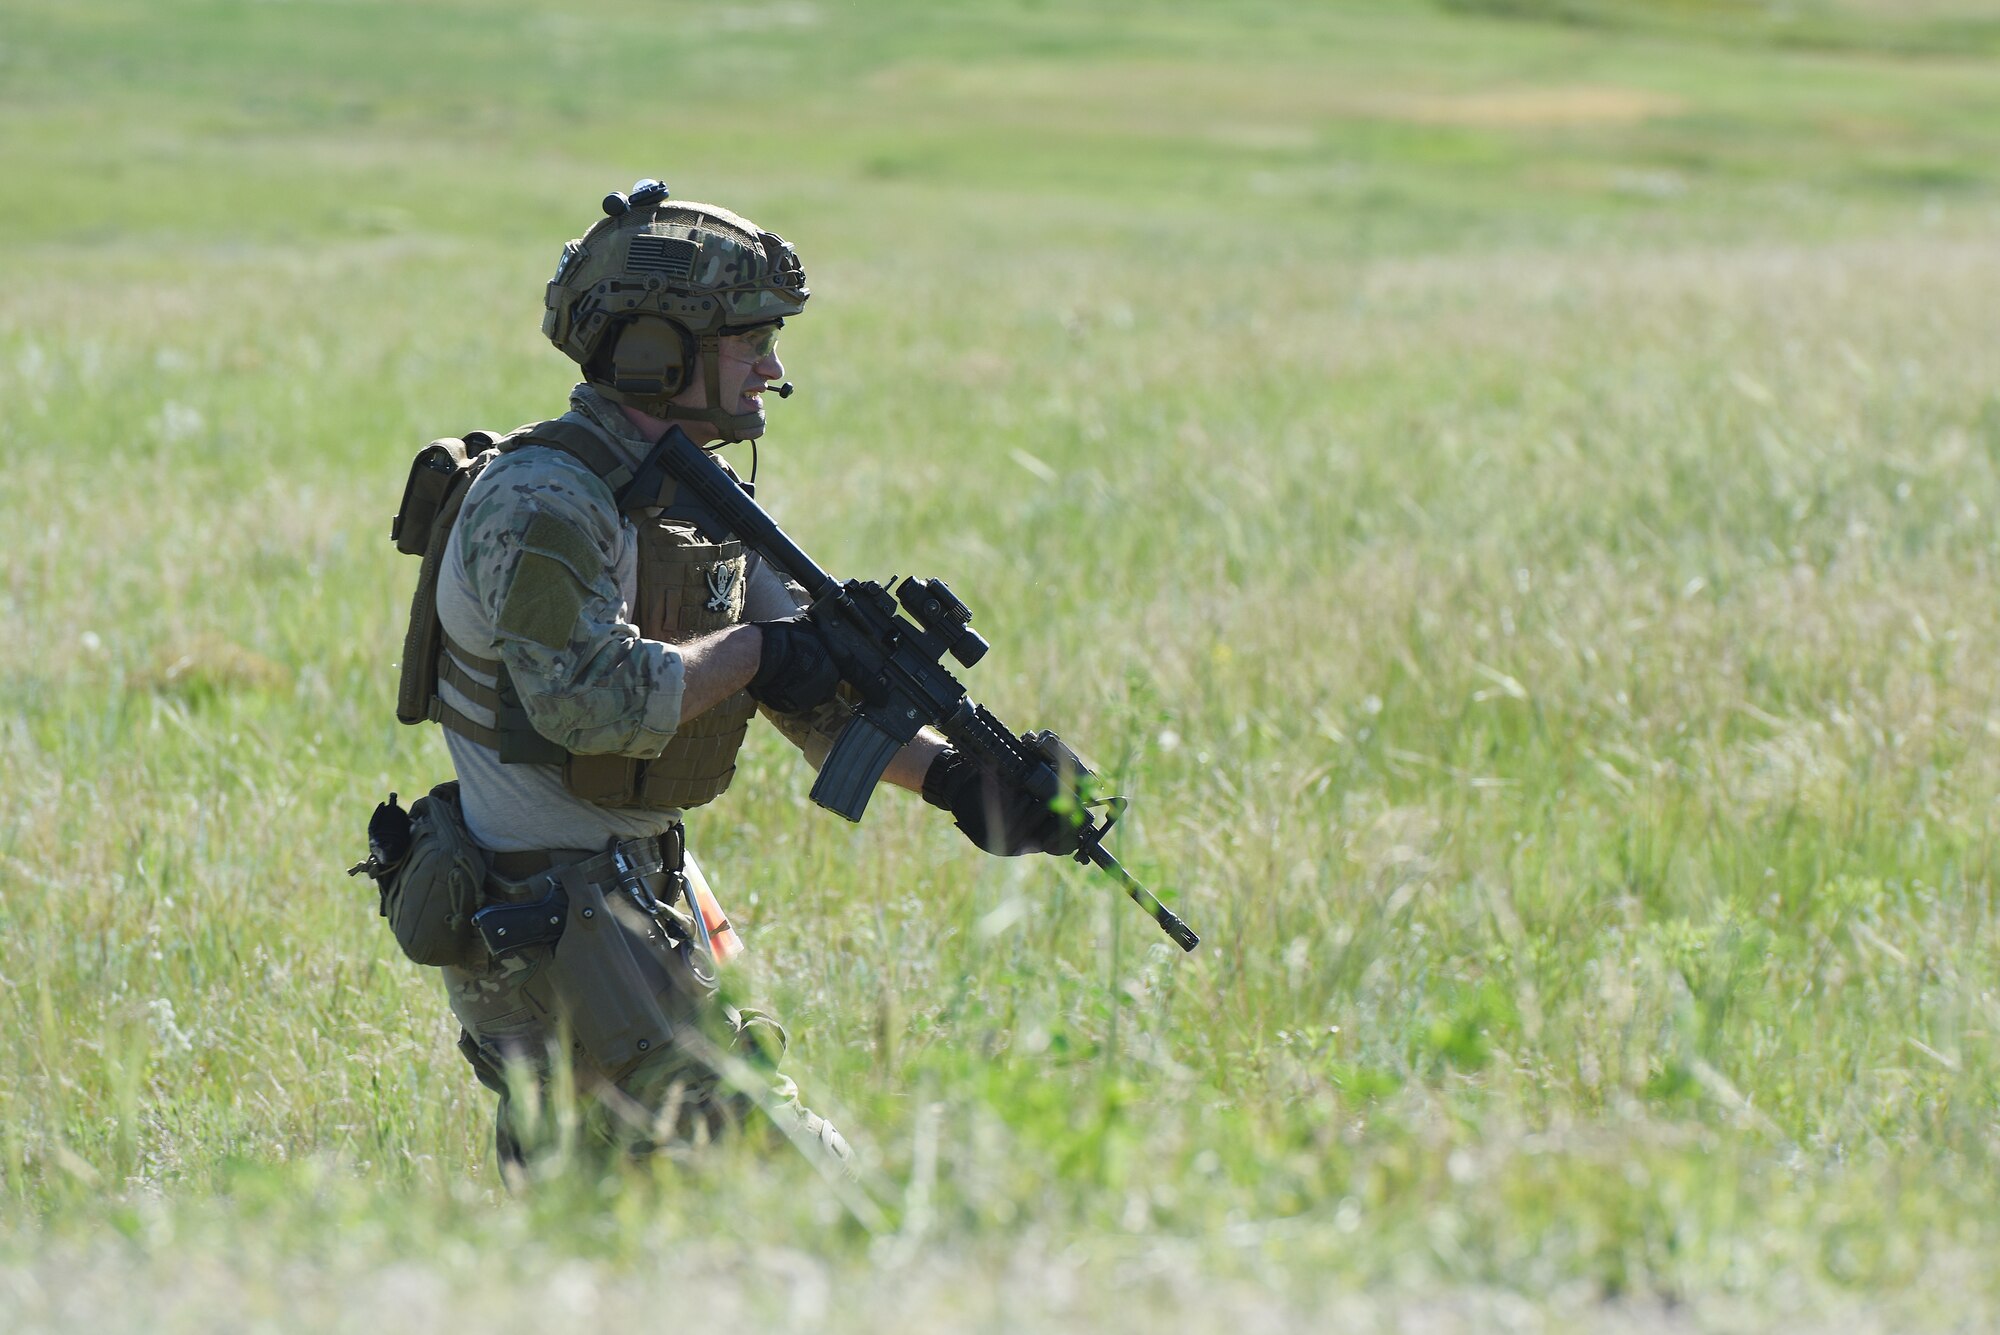 An Airman with the 341st Security Support Squadron tactical response force moves through a field during an integrated recapture and recovery exercise June 11, 2019, at an intercontinental ballistic missile launch facility near Simms, Mont.